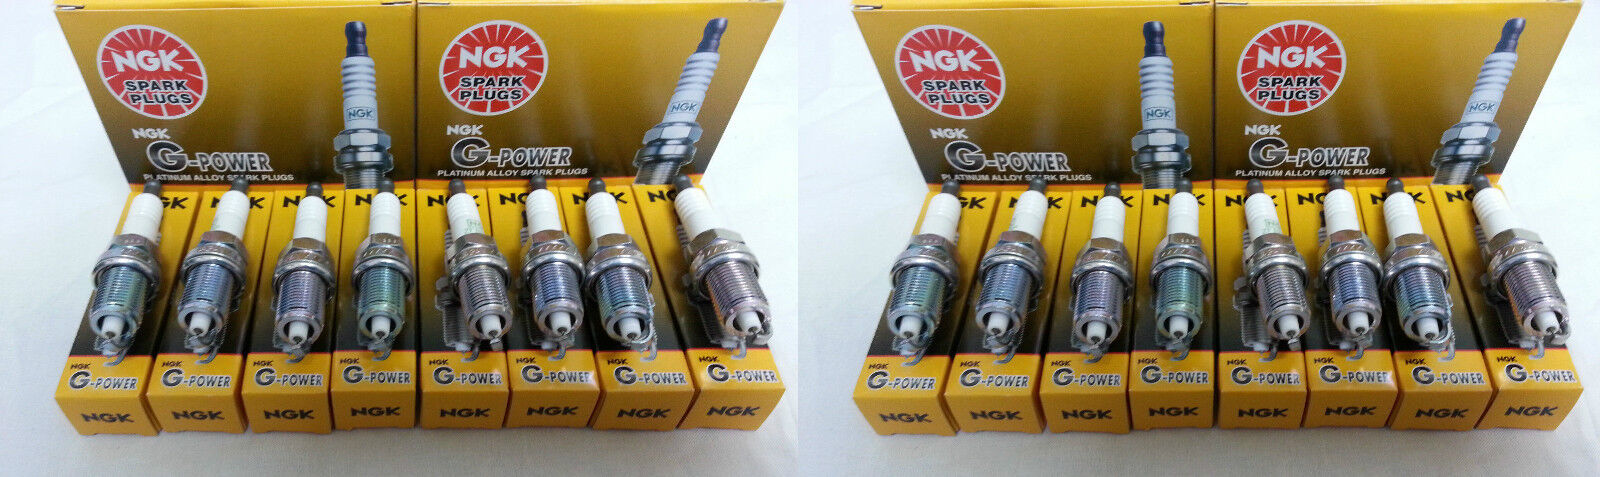 16-New NGK G-Power Platinum Spark Plugs LZTR4AGP #5017 Made in Japan 